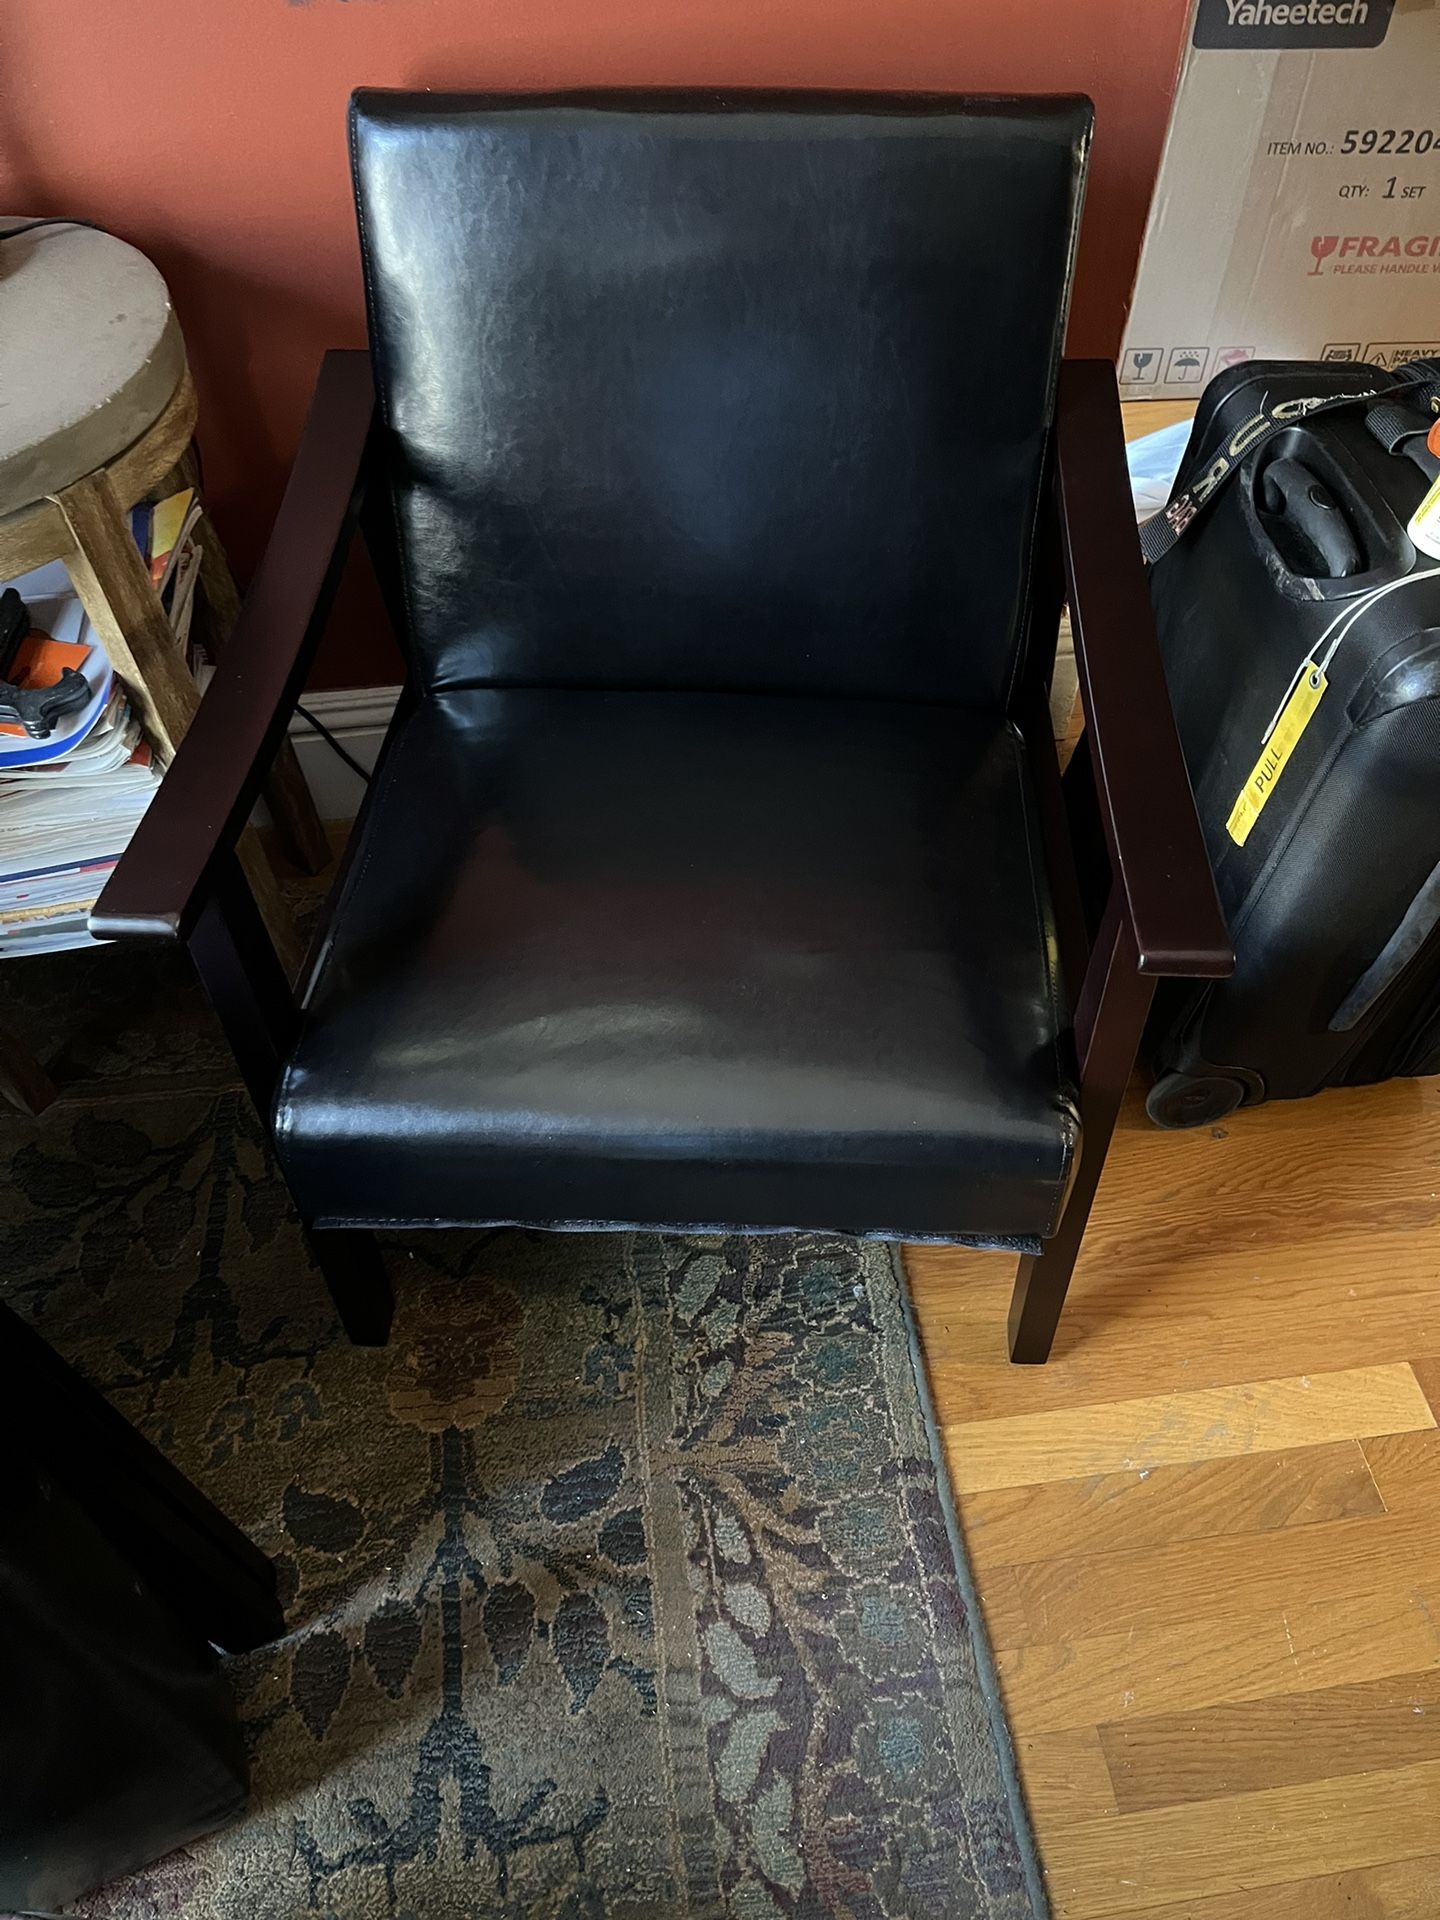 Pair Of Club Chairs 